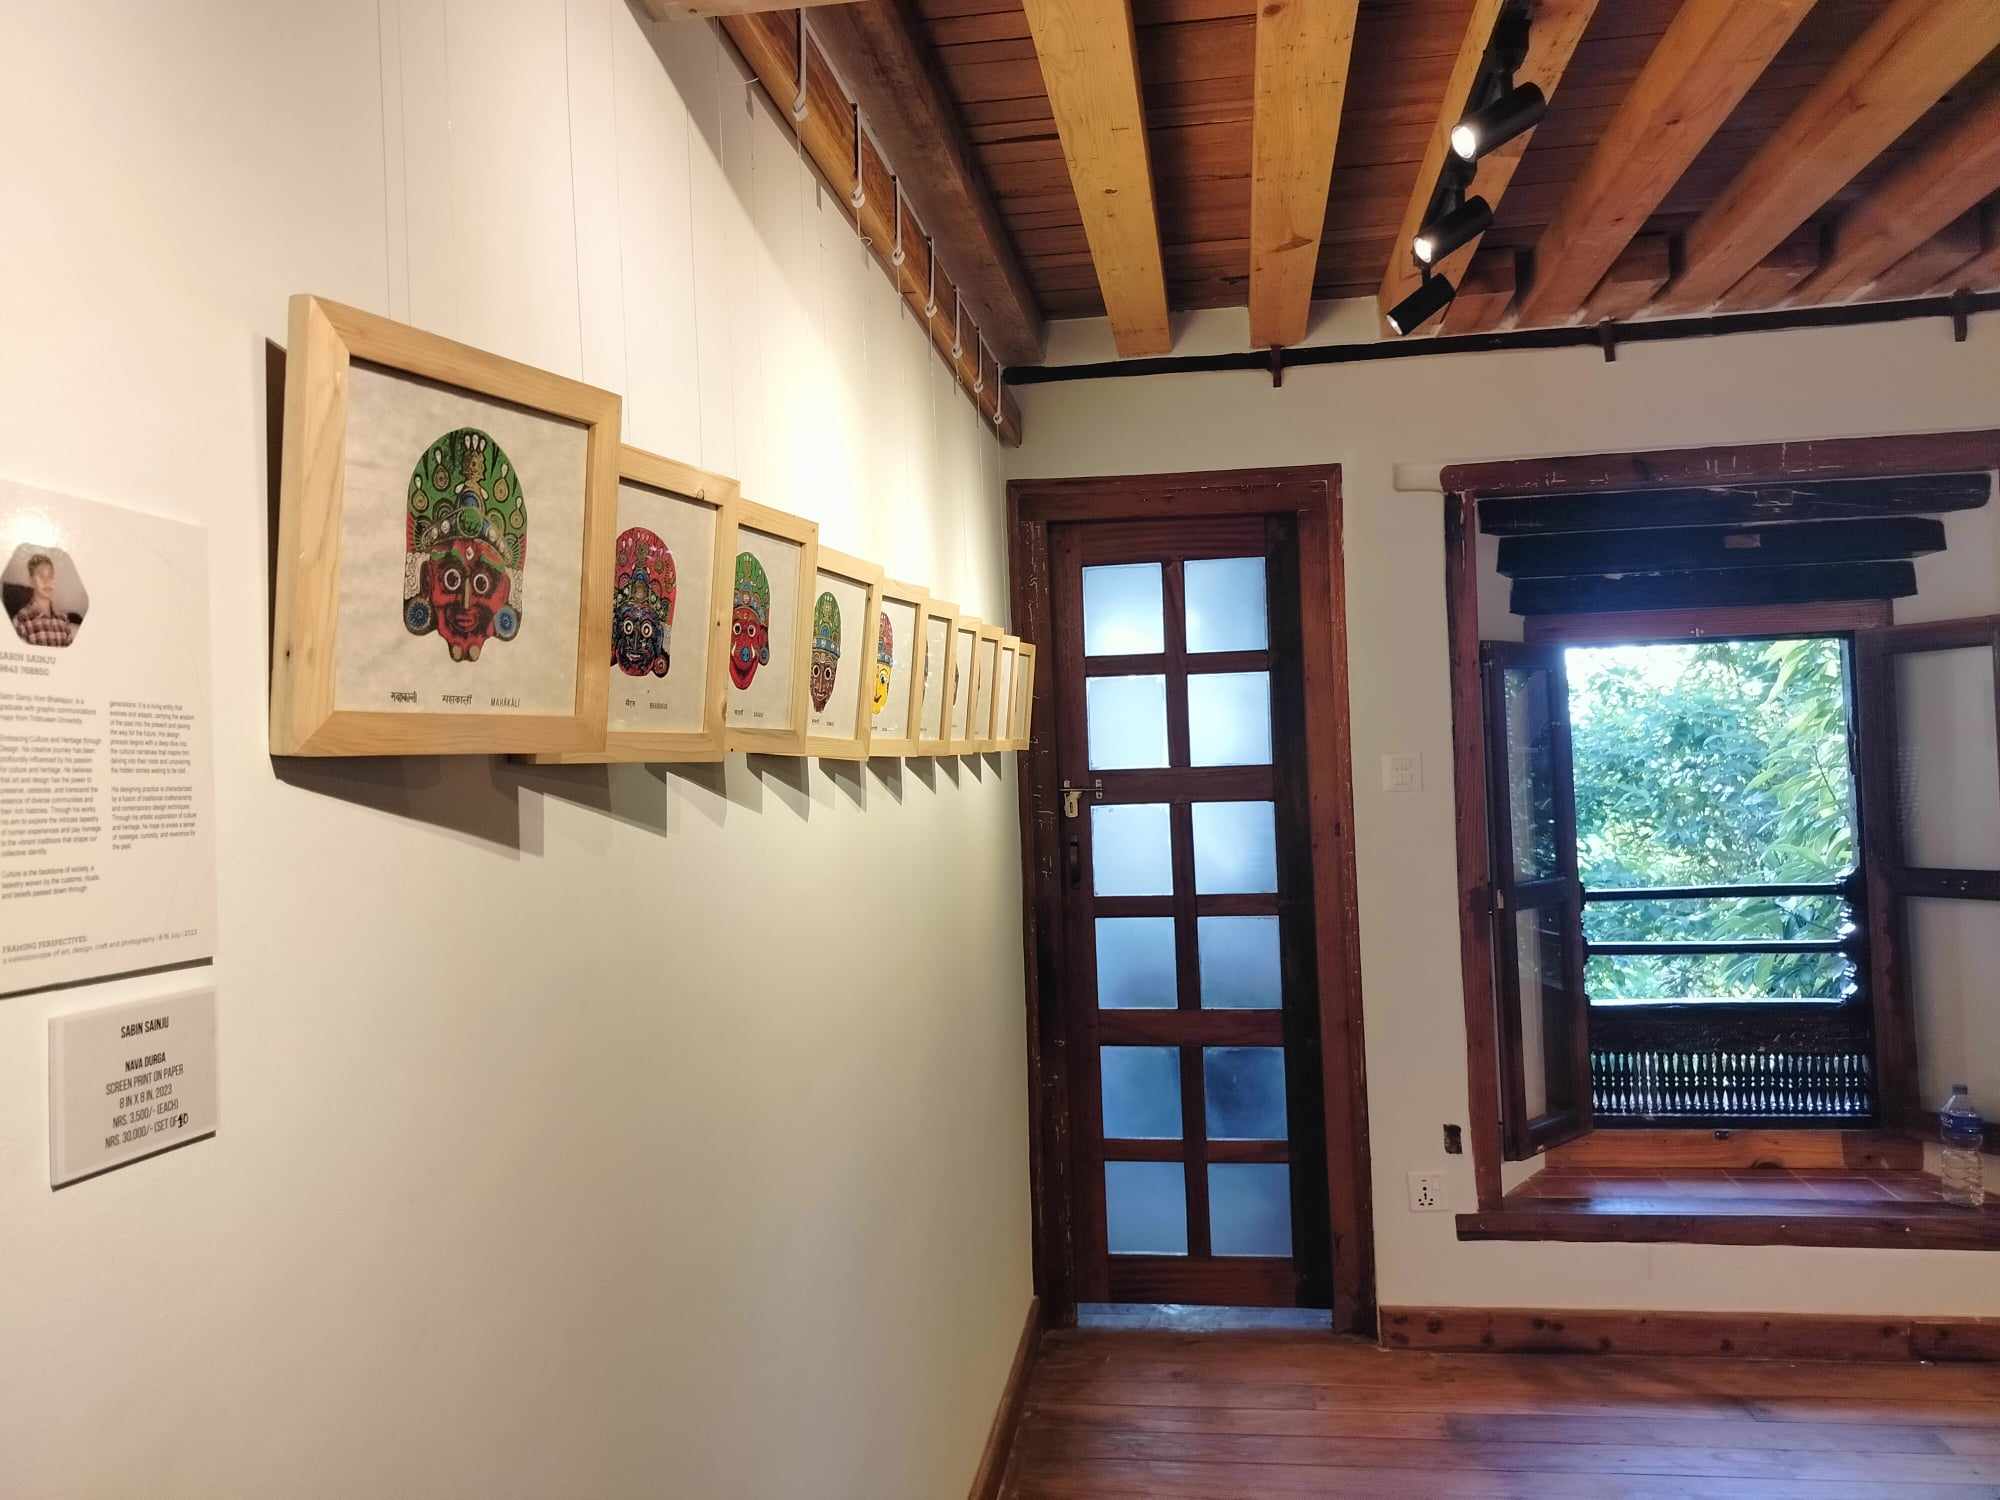 Paintings at the exhibition Framing perspective at Rich Museum of Craft and Design, Sunaguthi.